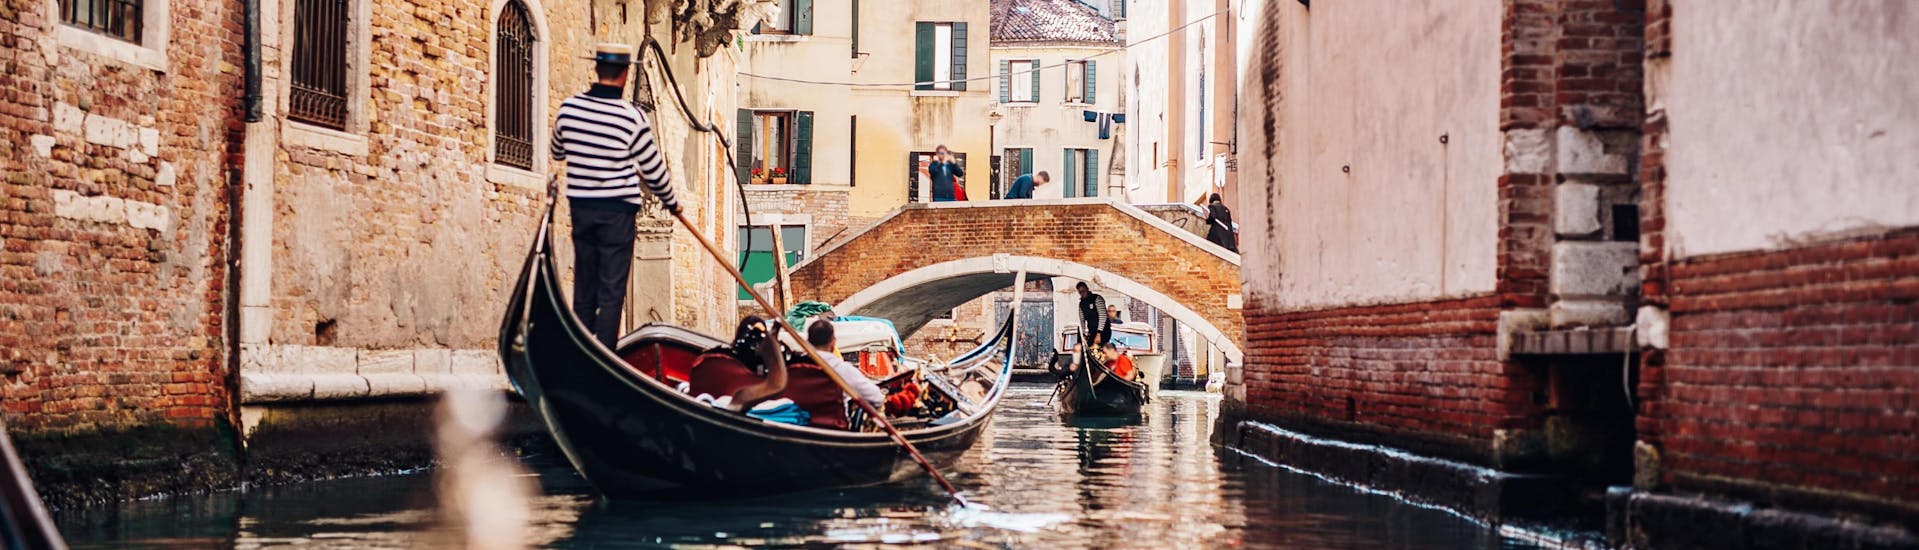 A gondoliere is paddling the boat through a narrow canal on a gondola ride in the Venetian Lagoon.